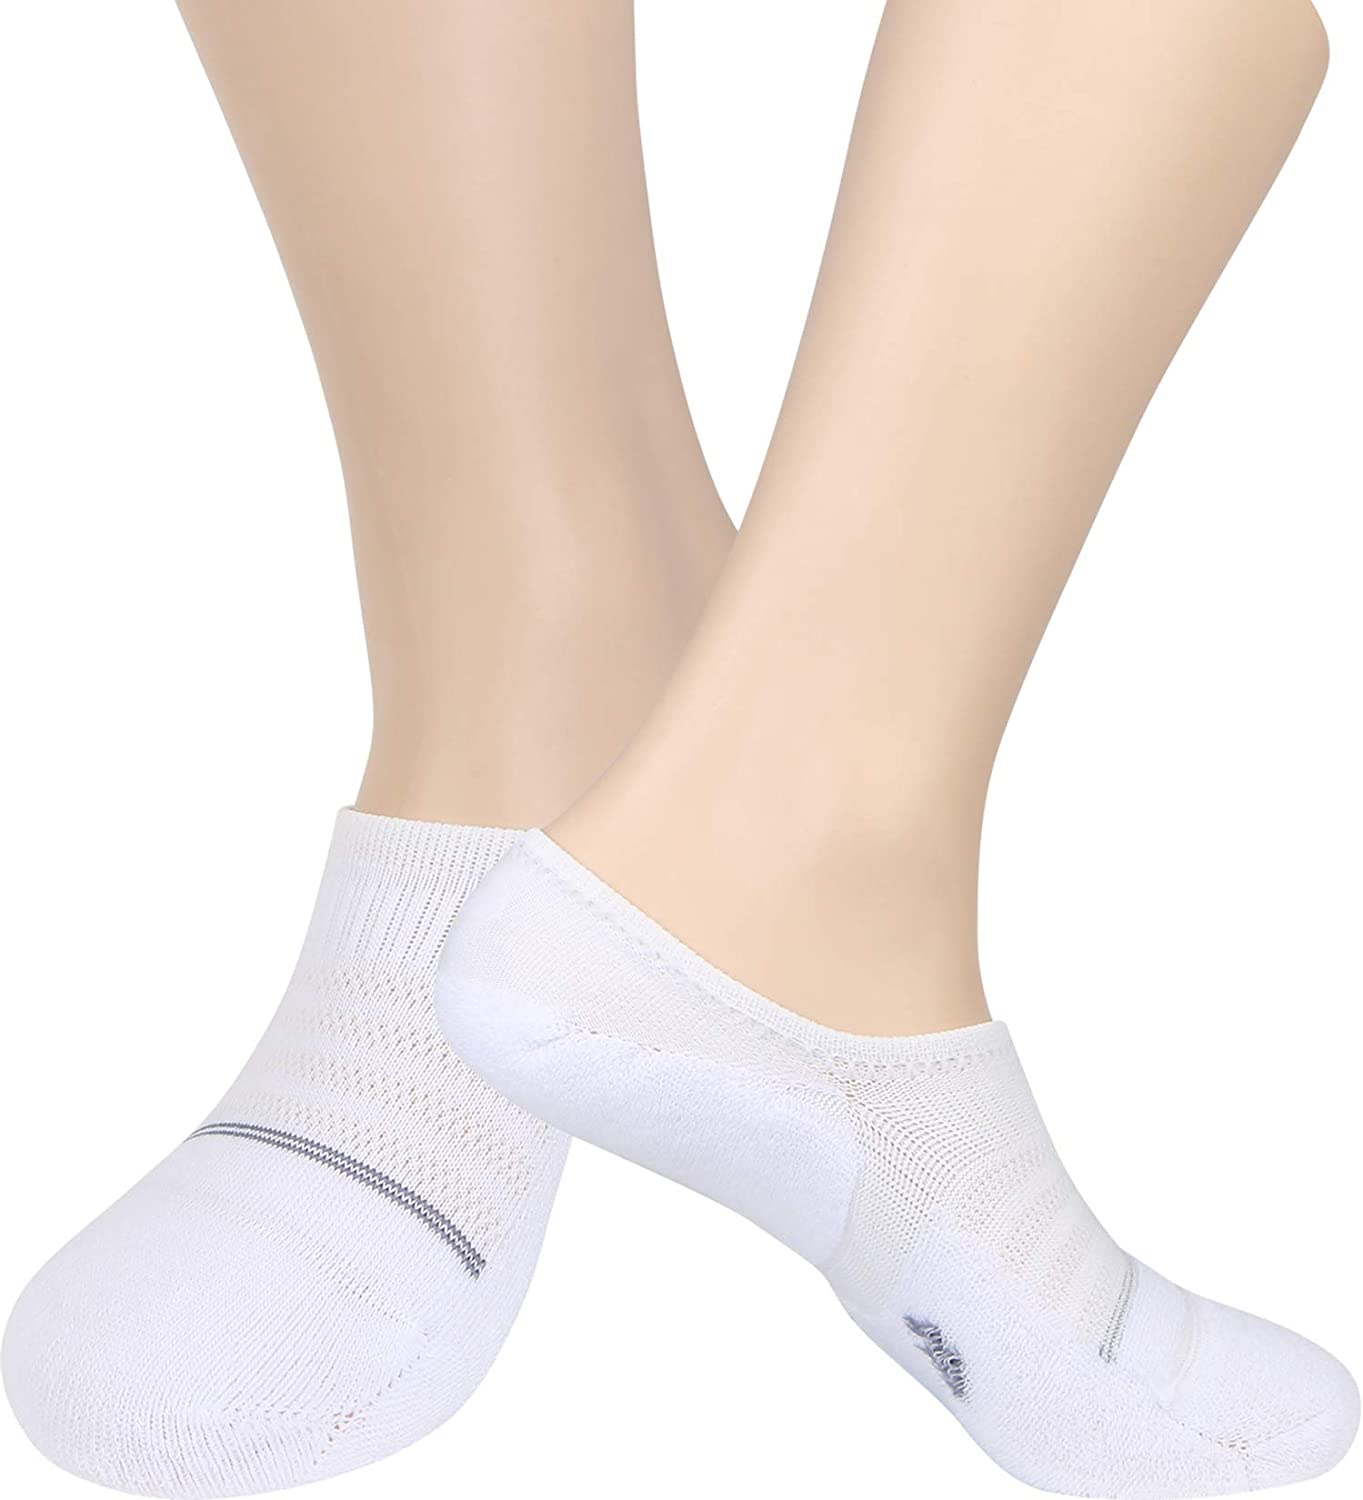 Pro Mountain Seamless Thick No Show Socks For Women Cotton Cushioned Low 6  Pack | eBay